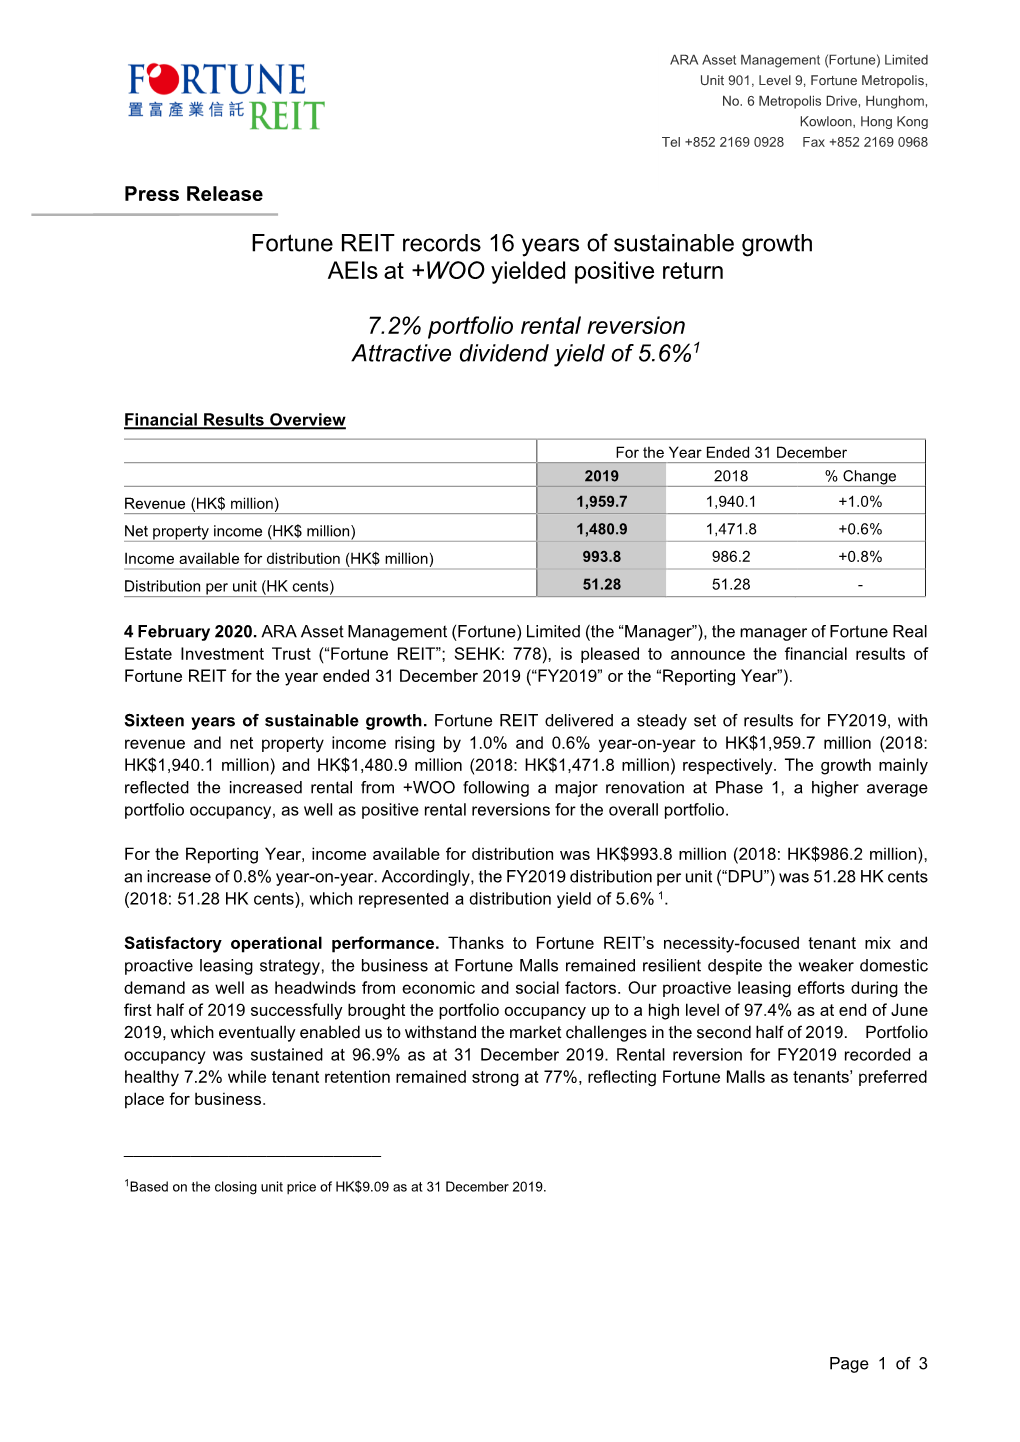 Fortune REIT Records 16 Years of Sustainable Growth Aeis at +WOO Yielded Positive Return